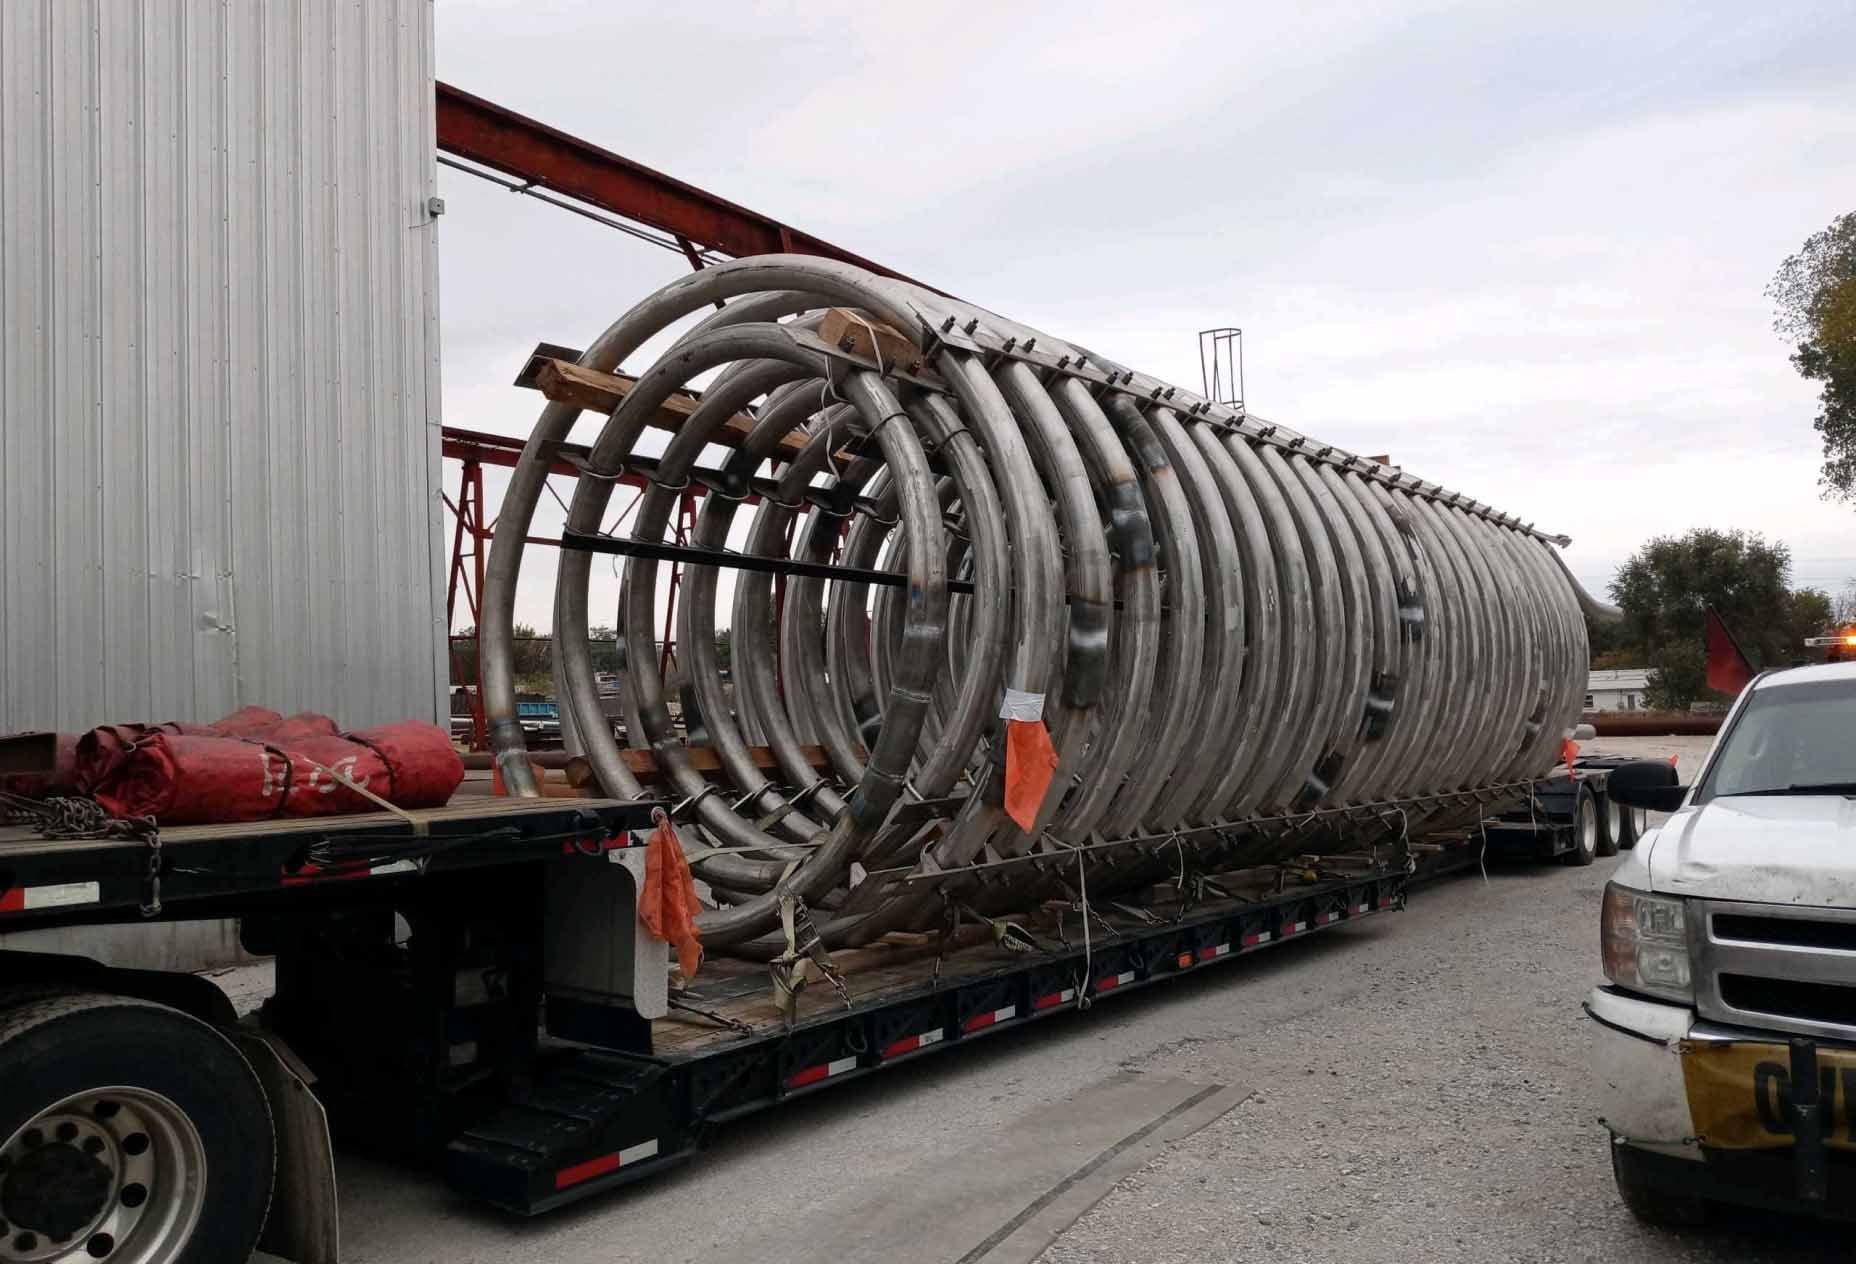 A unique load of a large coiled metal sits on a truck's low bed.